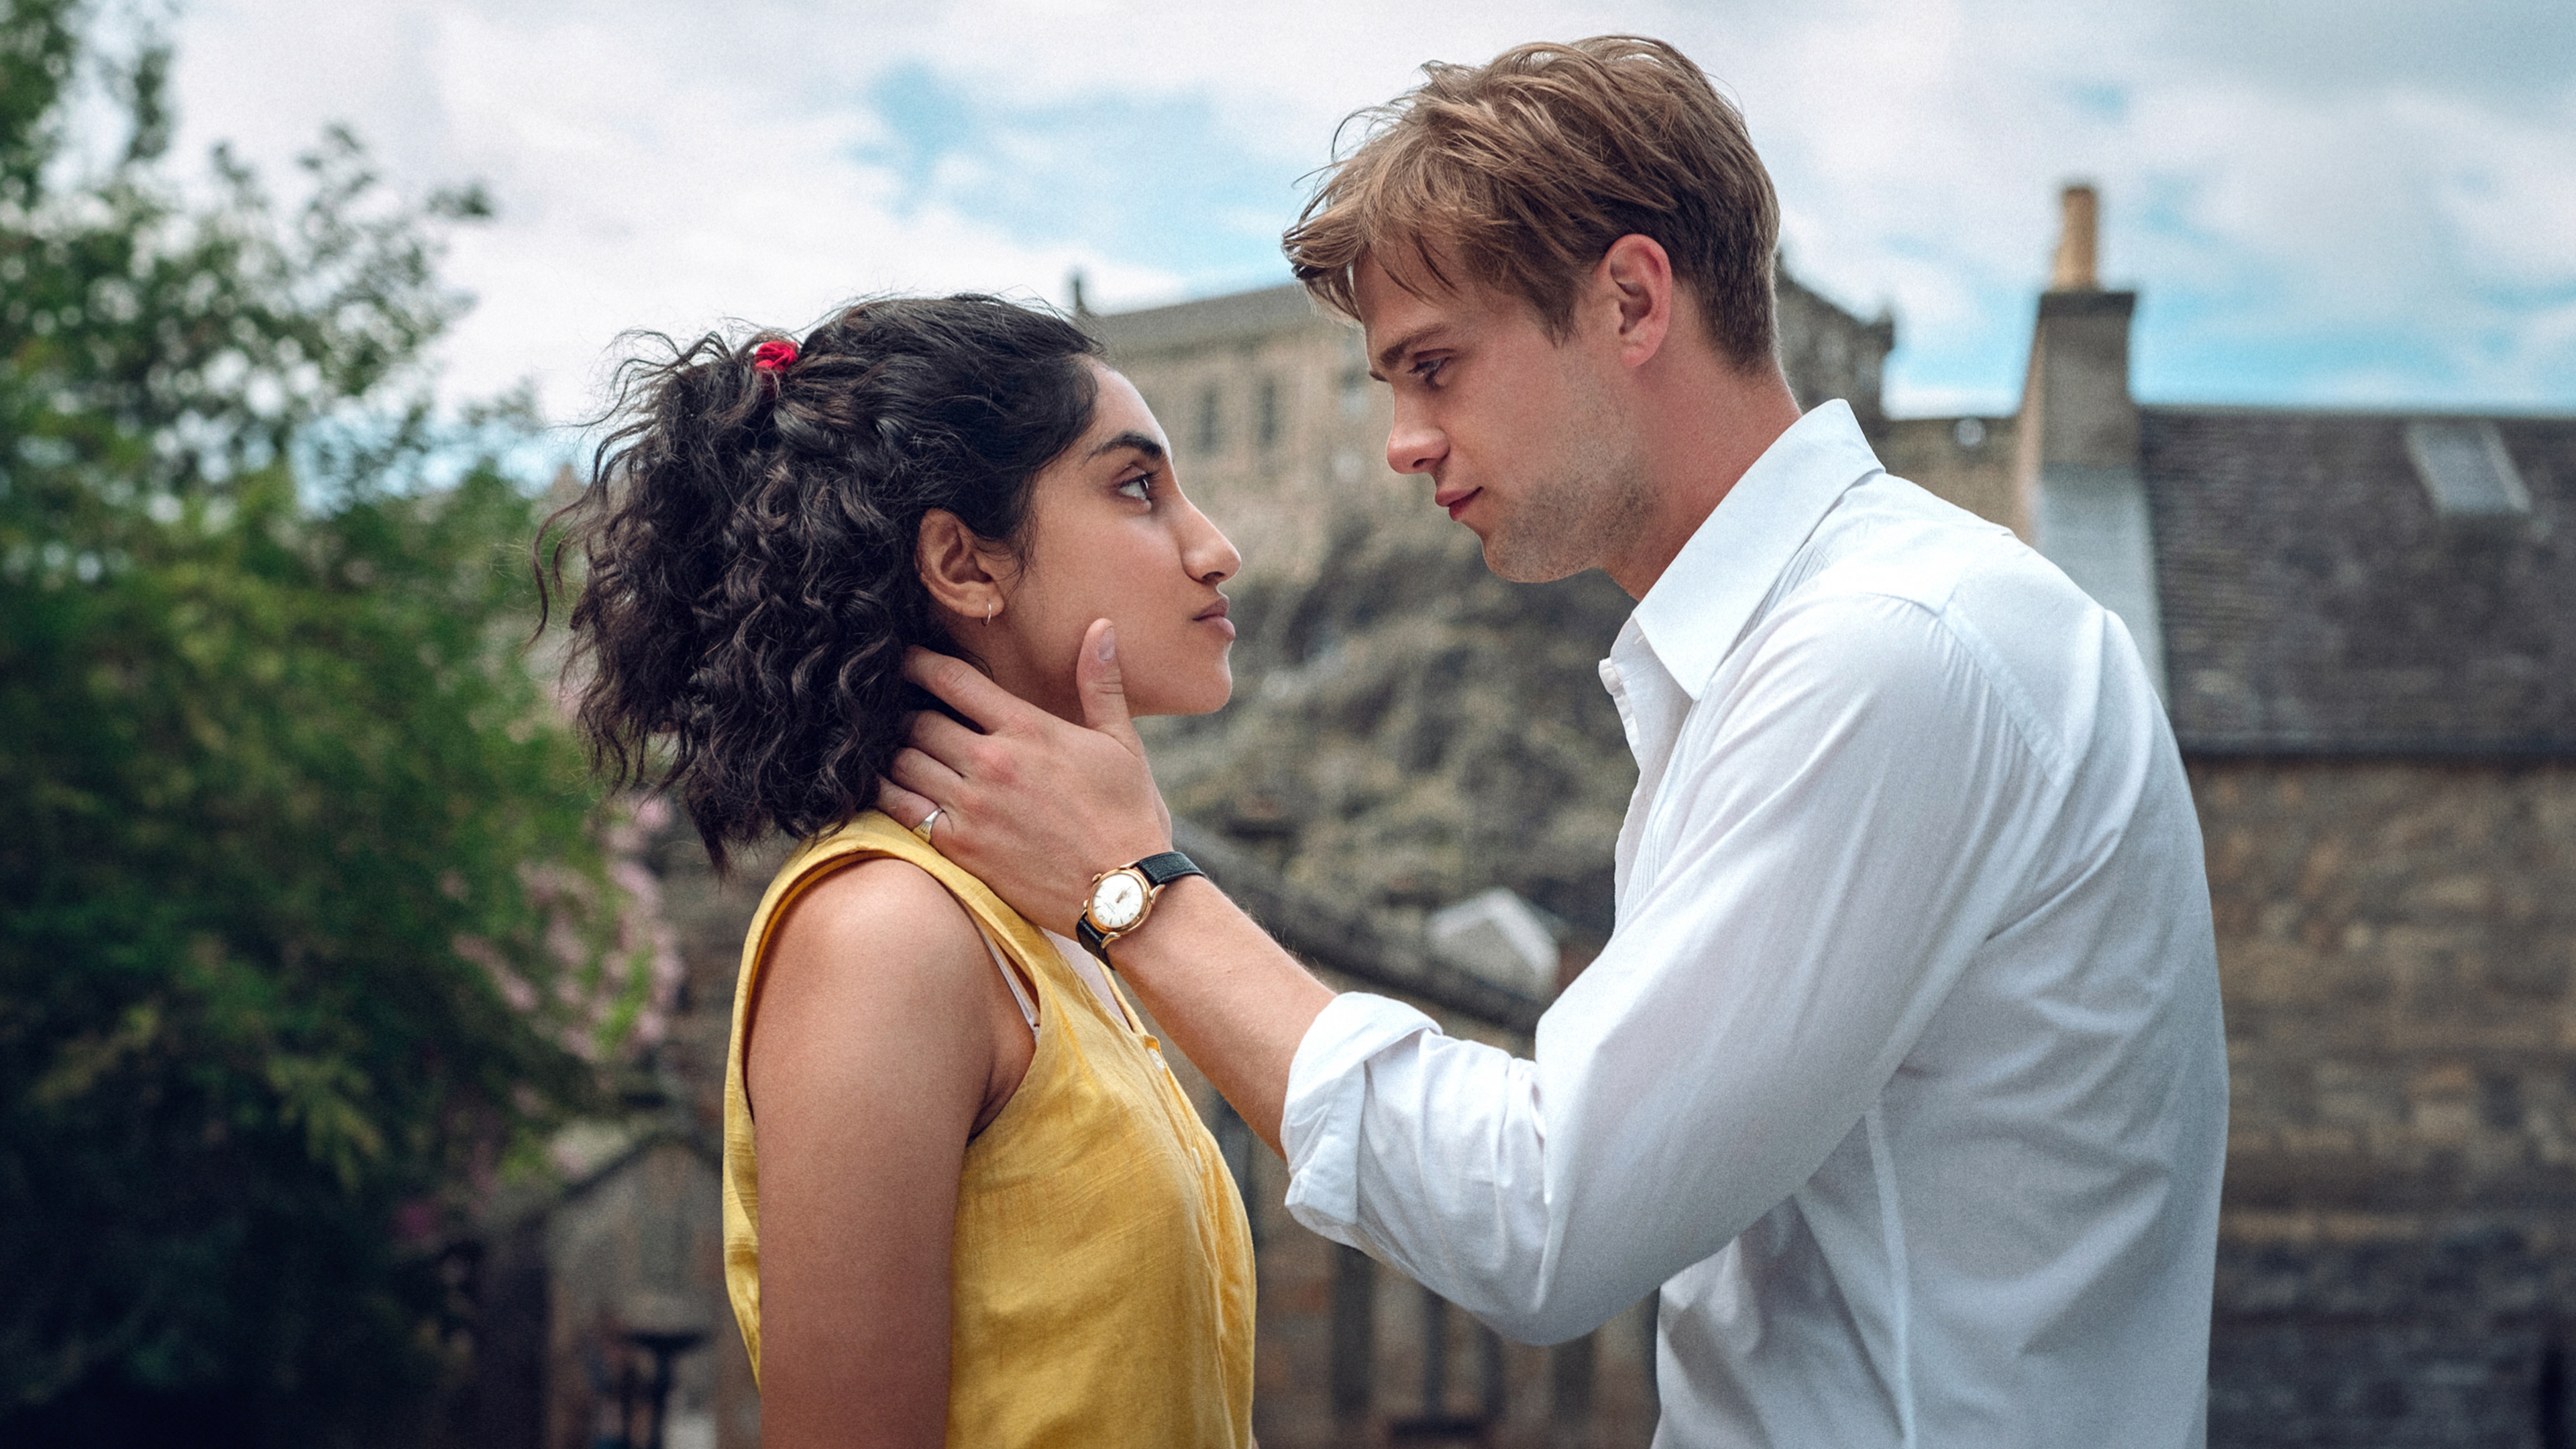 Leo Woodall as Dexter Mayhew and Ambika Mod as Emma Morley in One Day. “There’s something cathartic and therapeutic about it. Everyone needs a good cry,” Woodall says of the intensely emotional fan response to the Netflix series. Photo: Netflix